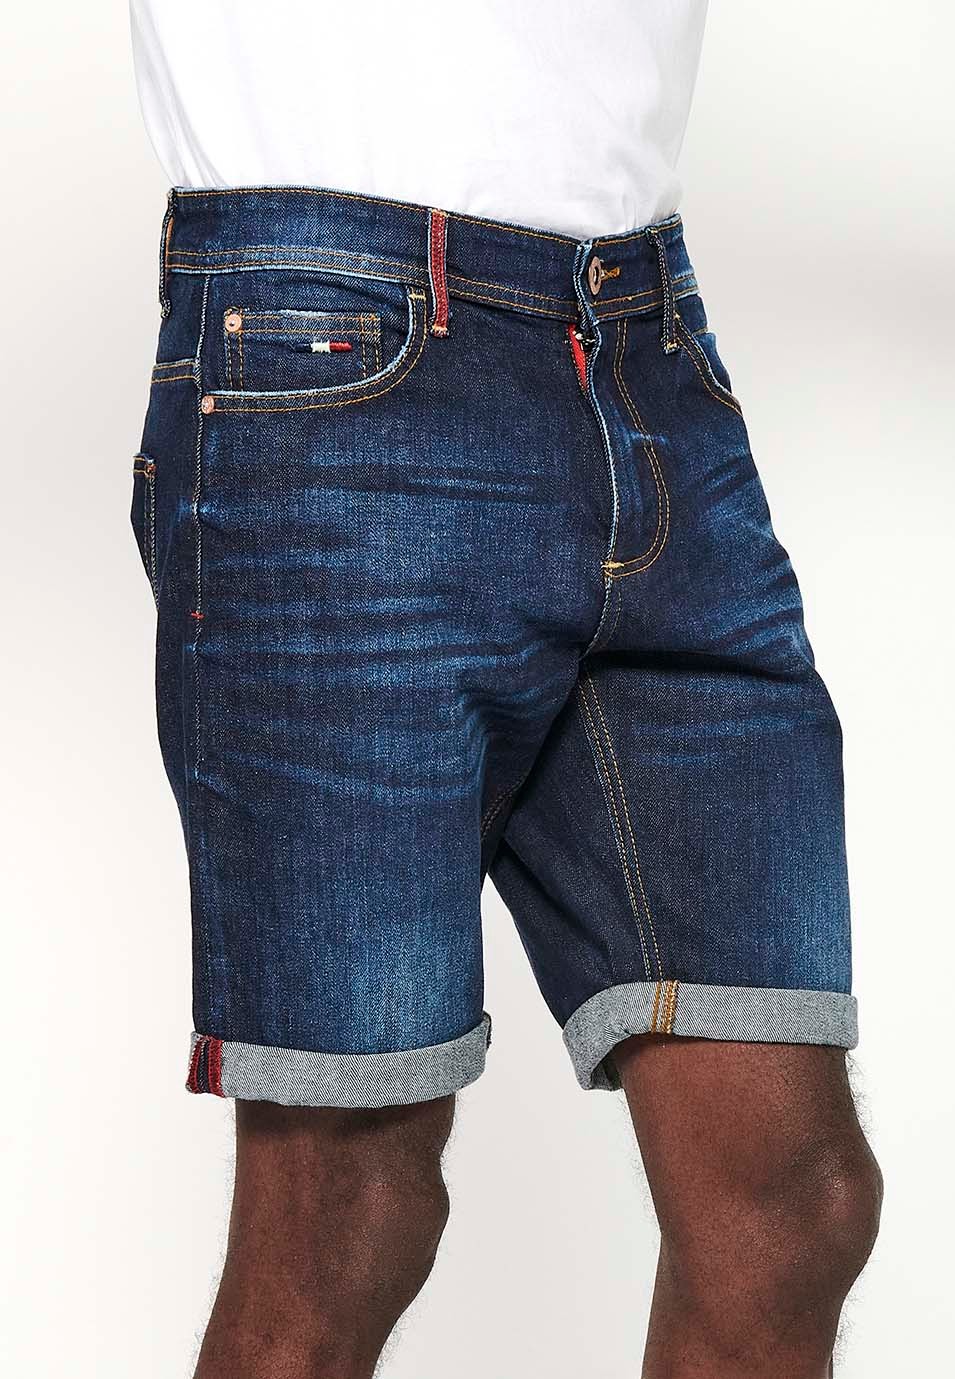 Shorts with turn-up finish and front zipper and button closure with five pockets, one blue pocket pocket for Men 2